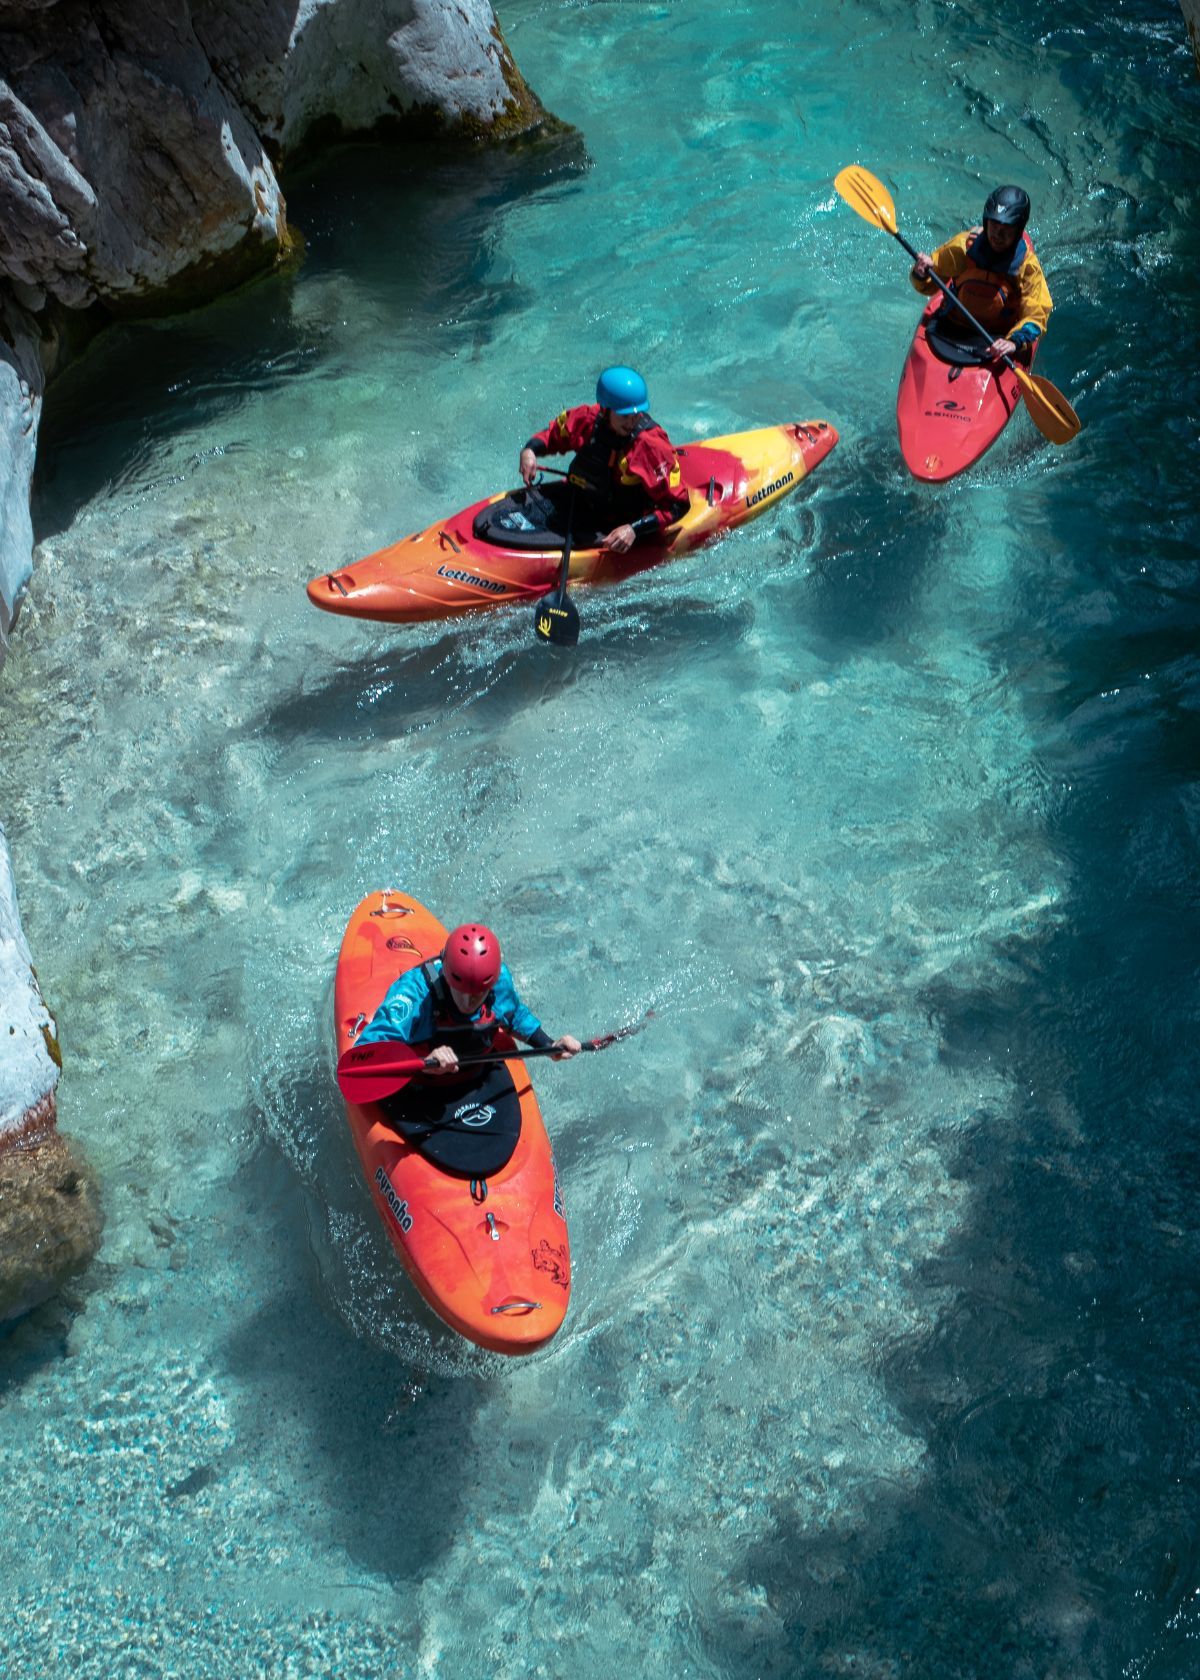 What to wear when kayaking